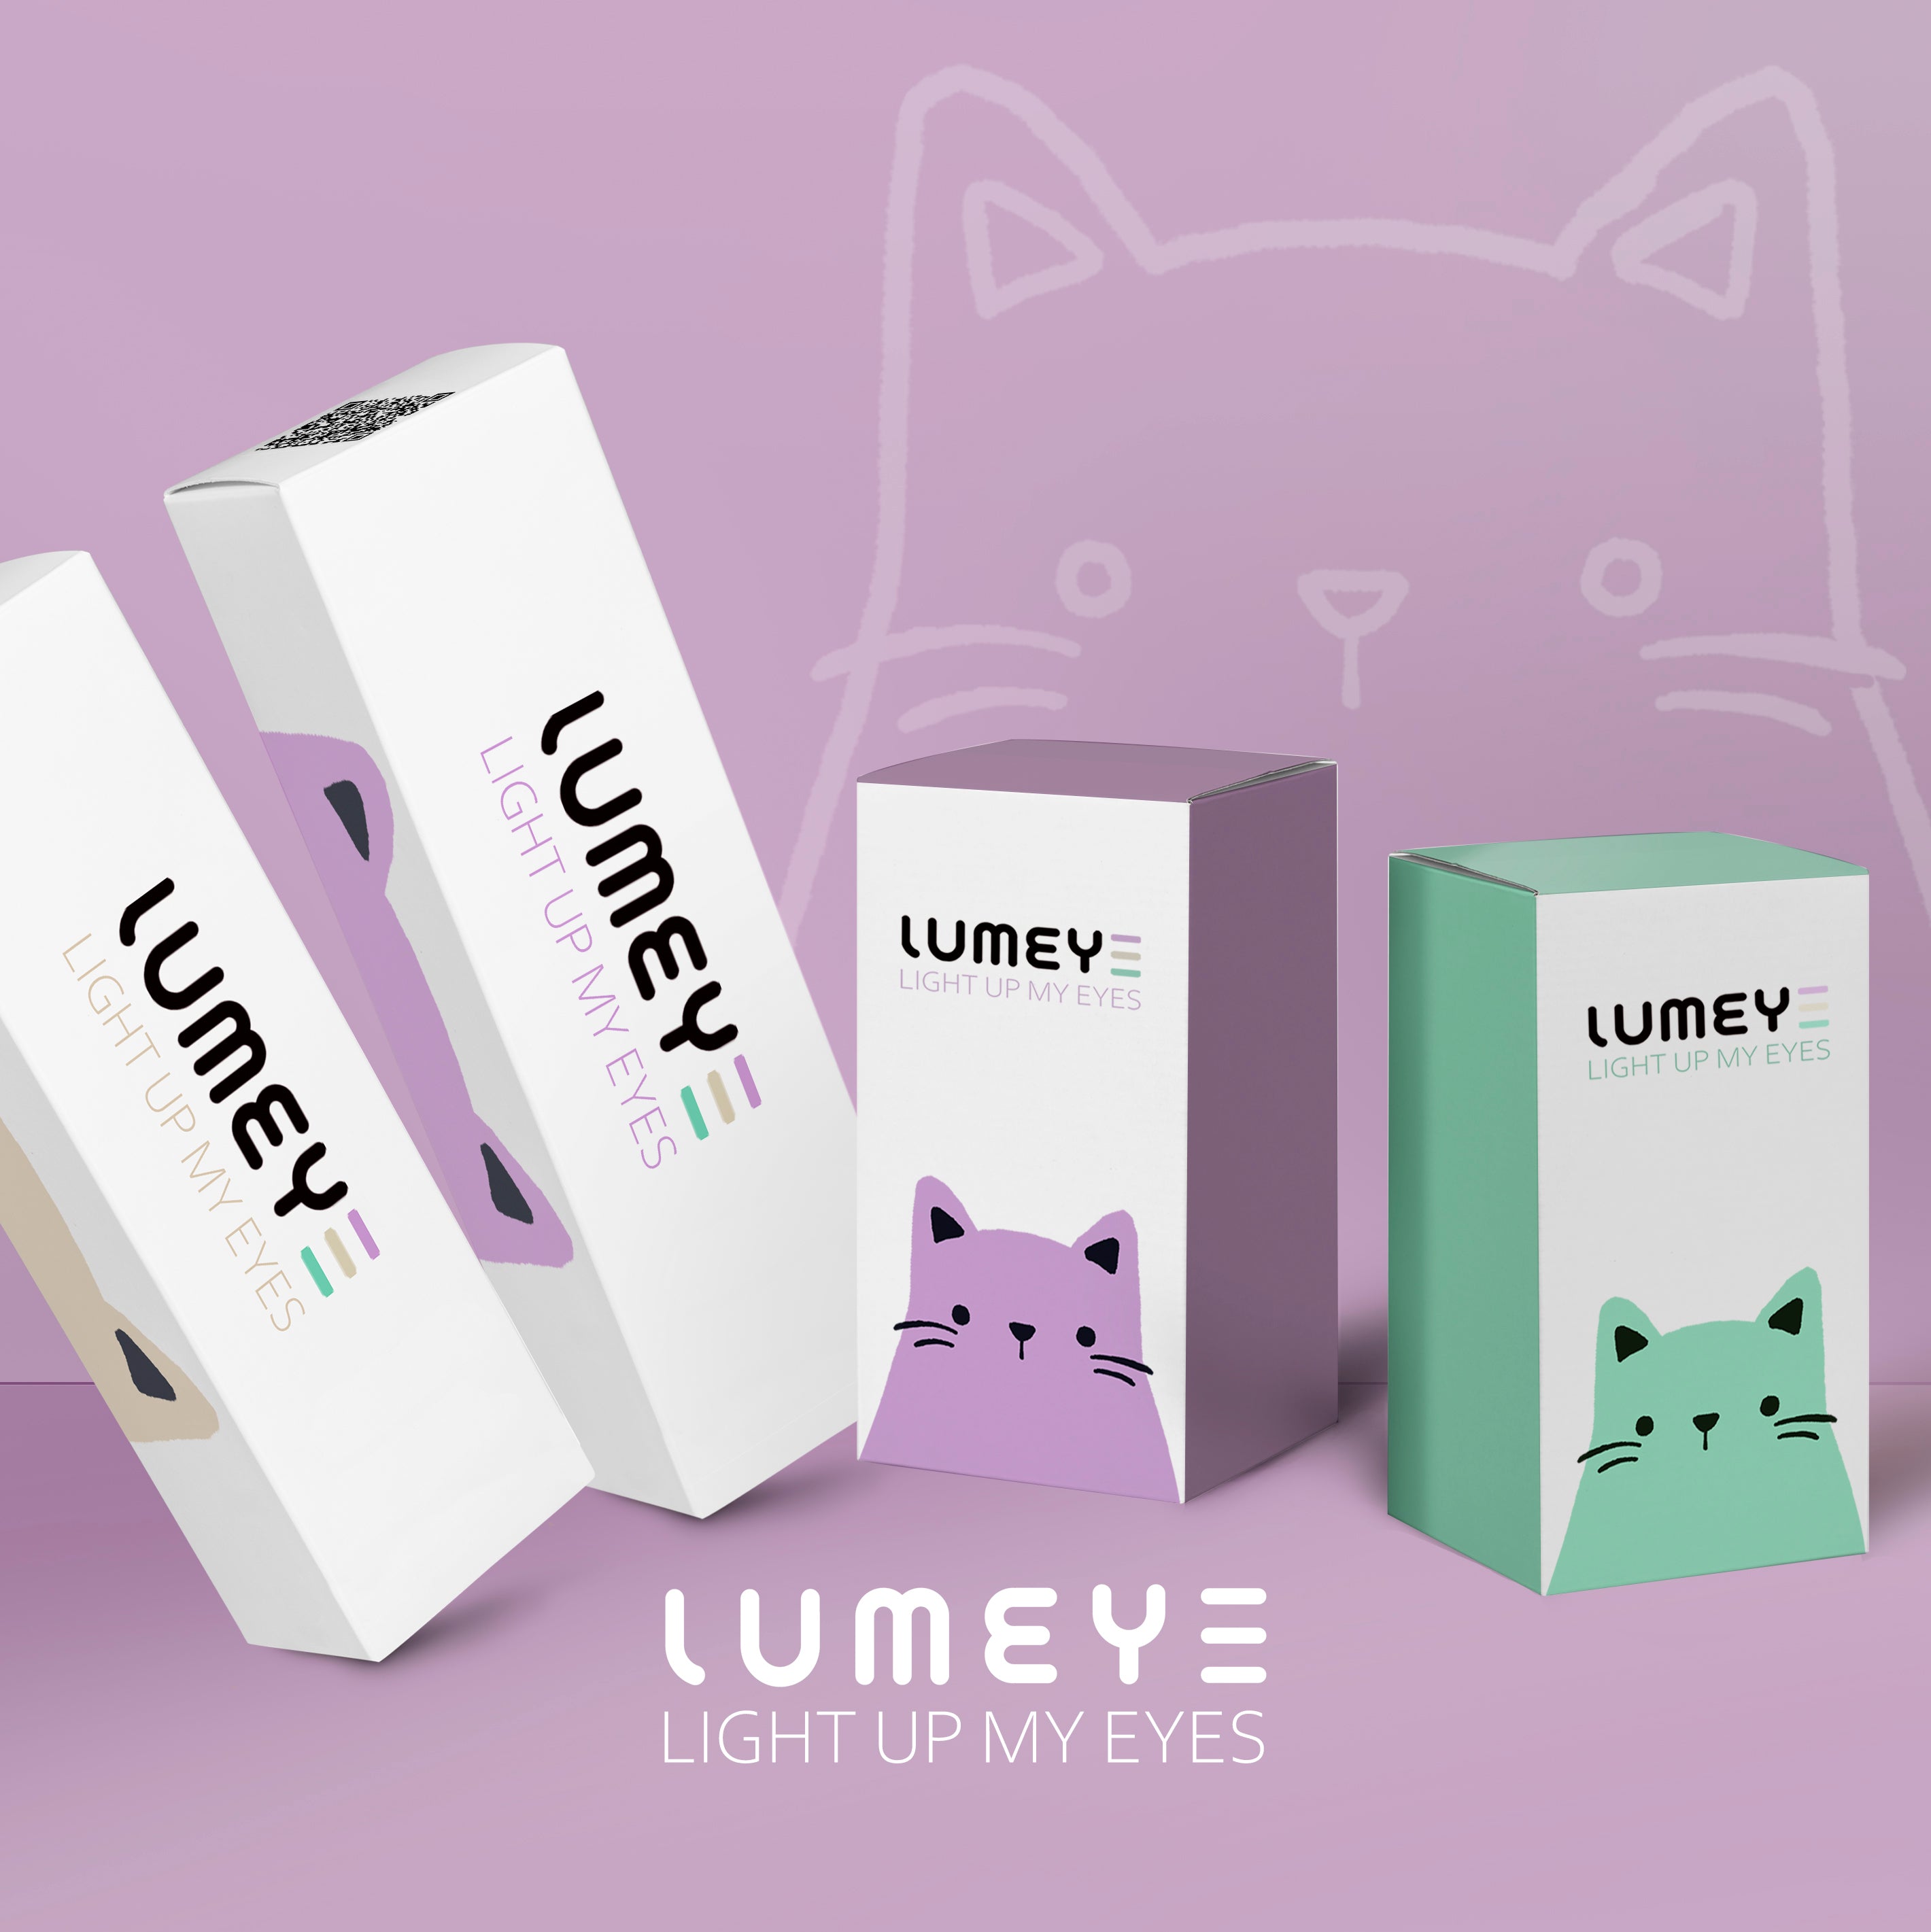 Best COLORED CONTACTS - LUMEYE Dorothy Green Colored Contact Lenses - LUMEYE